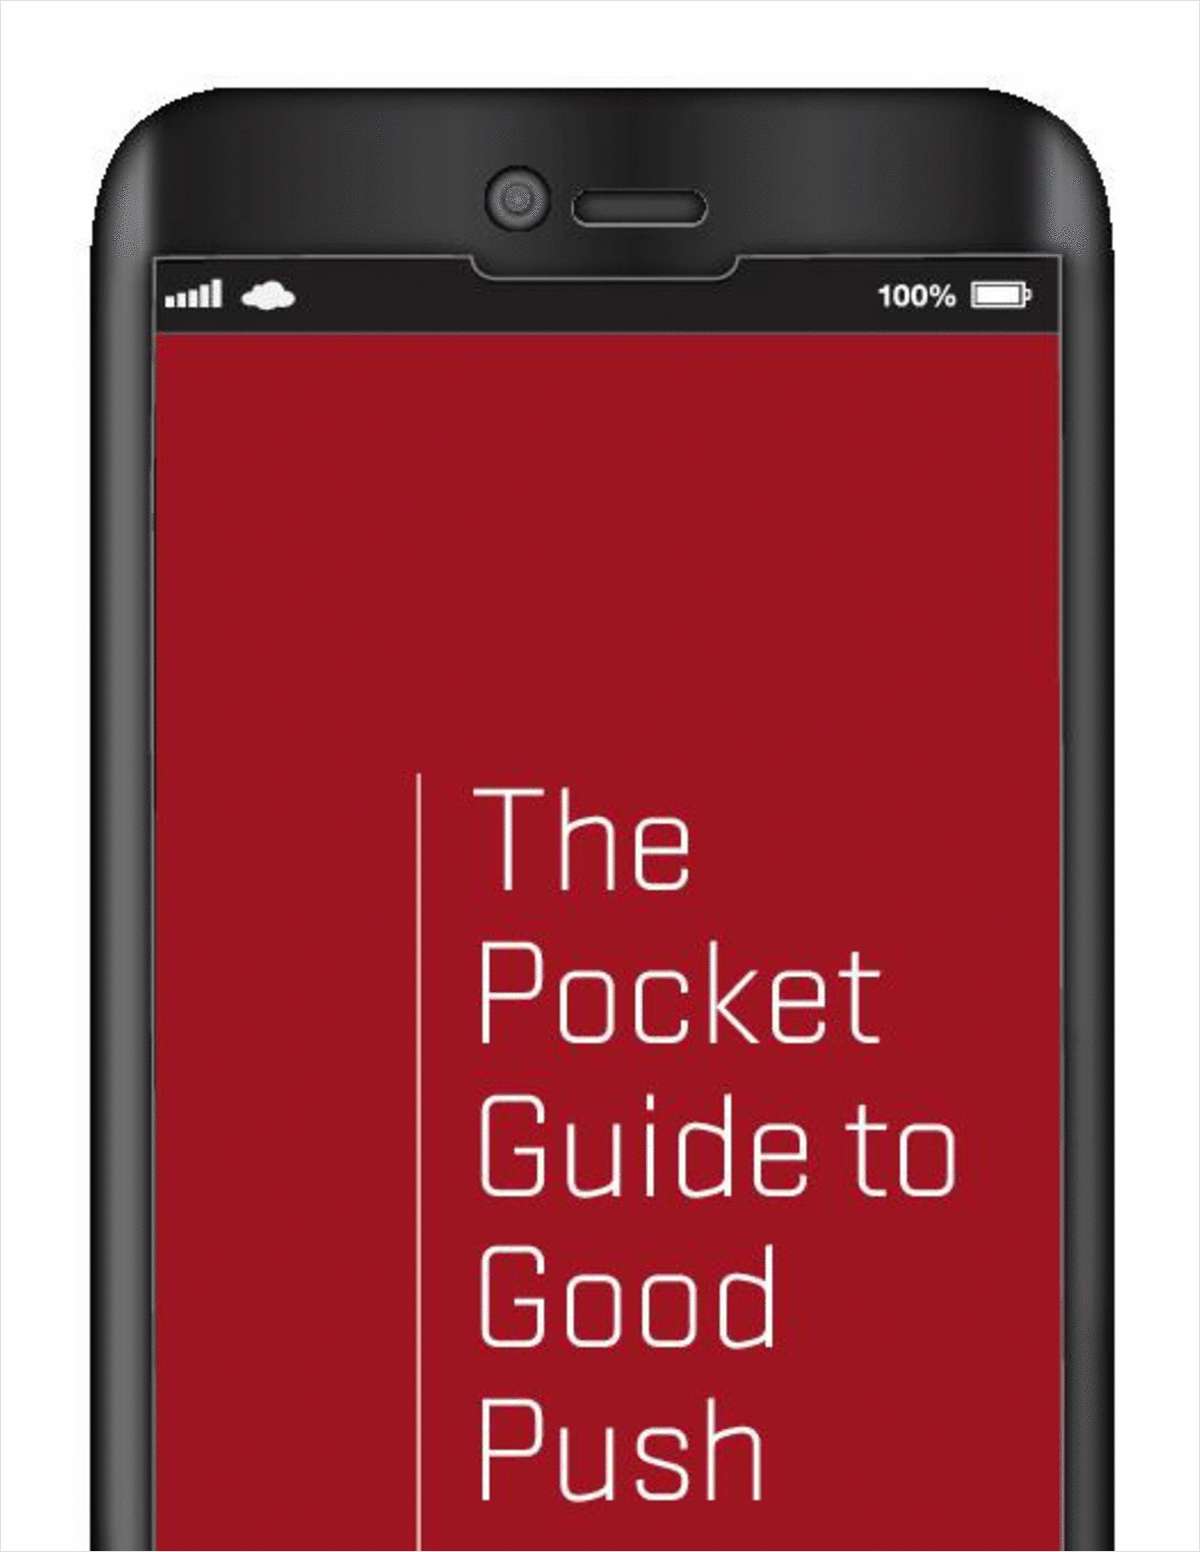 The Pocket Guide to Good Push